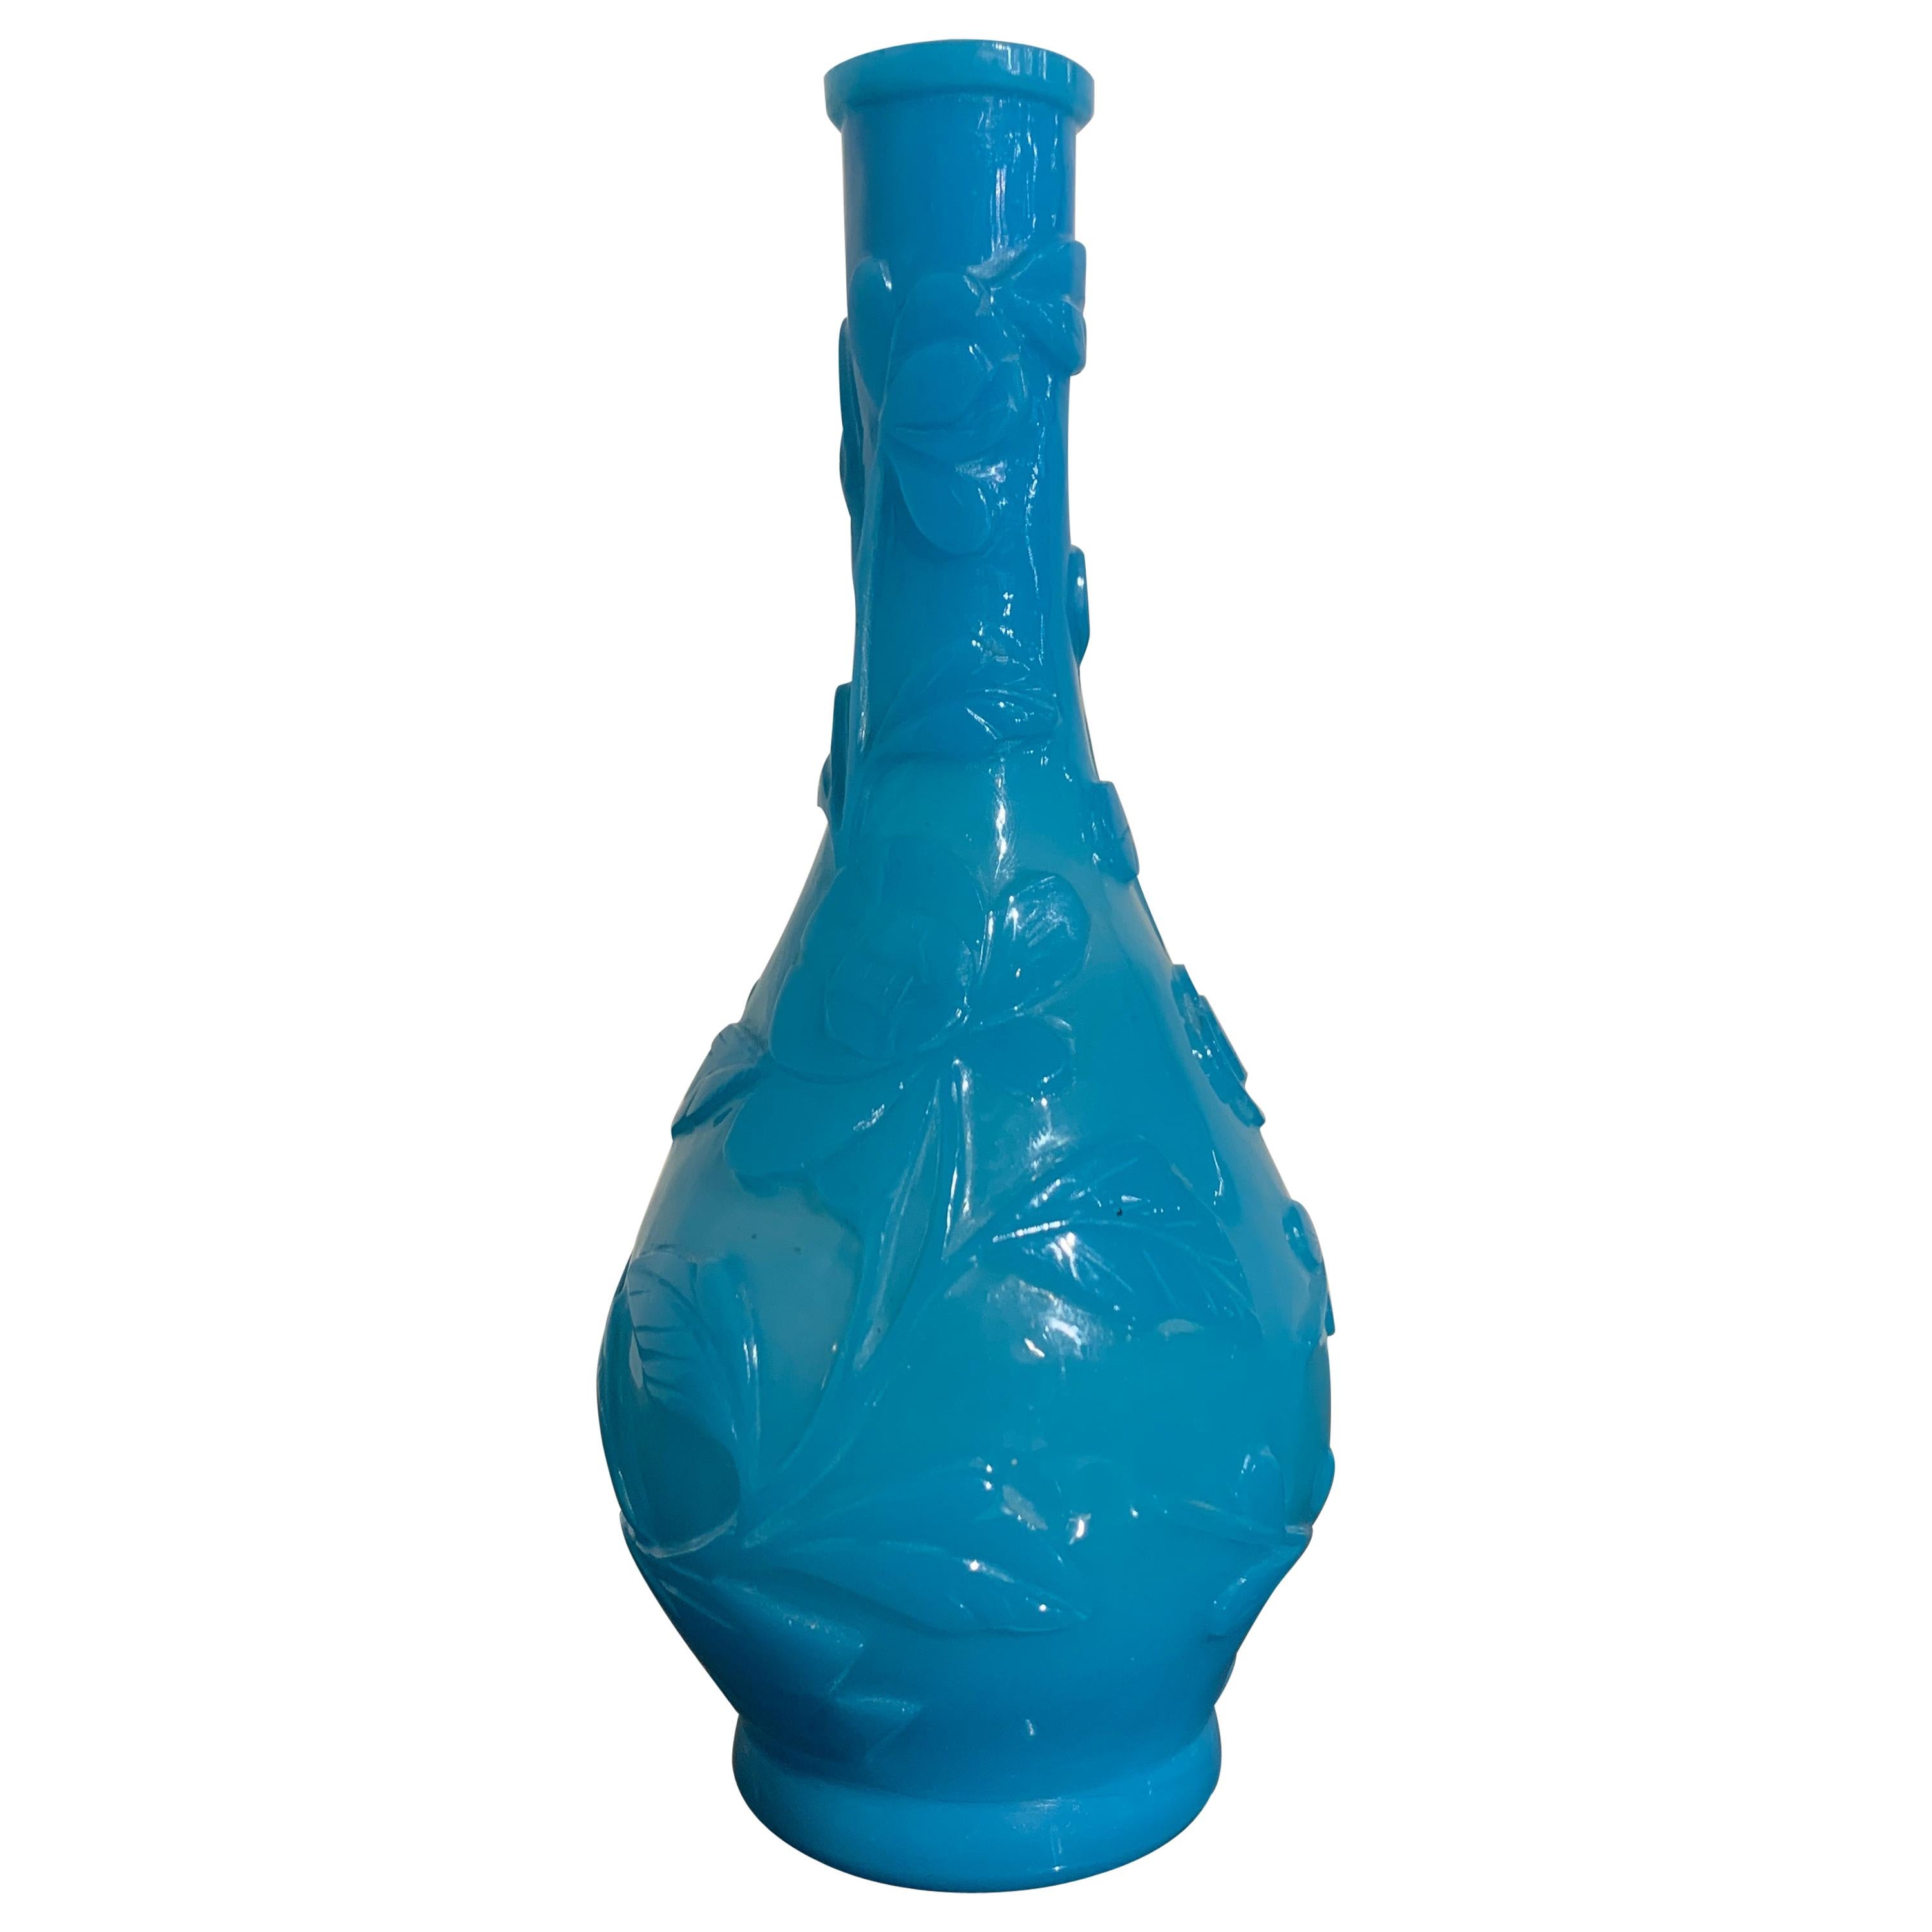 Chinese Turquoise Blue Peking Glass Vase, Republic Period, Early 20th Century